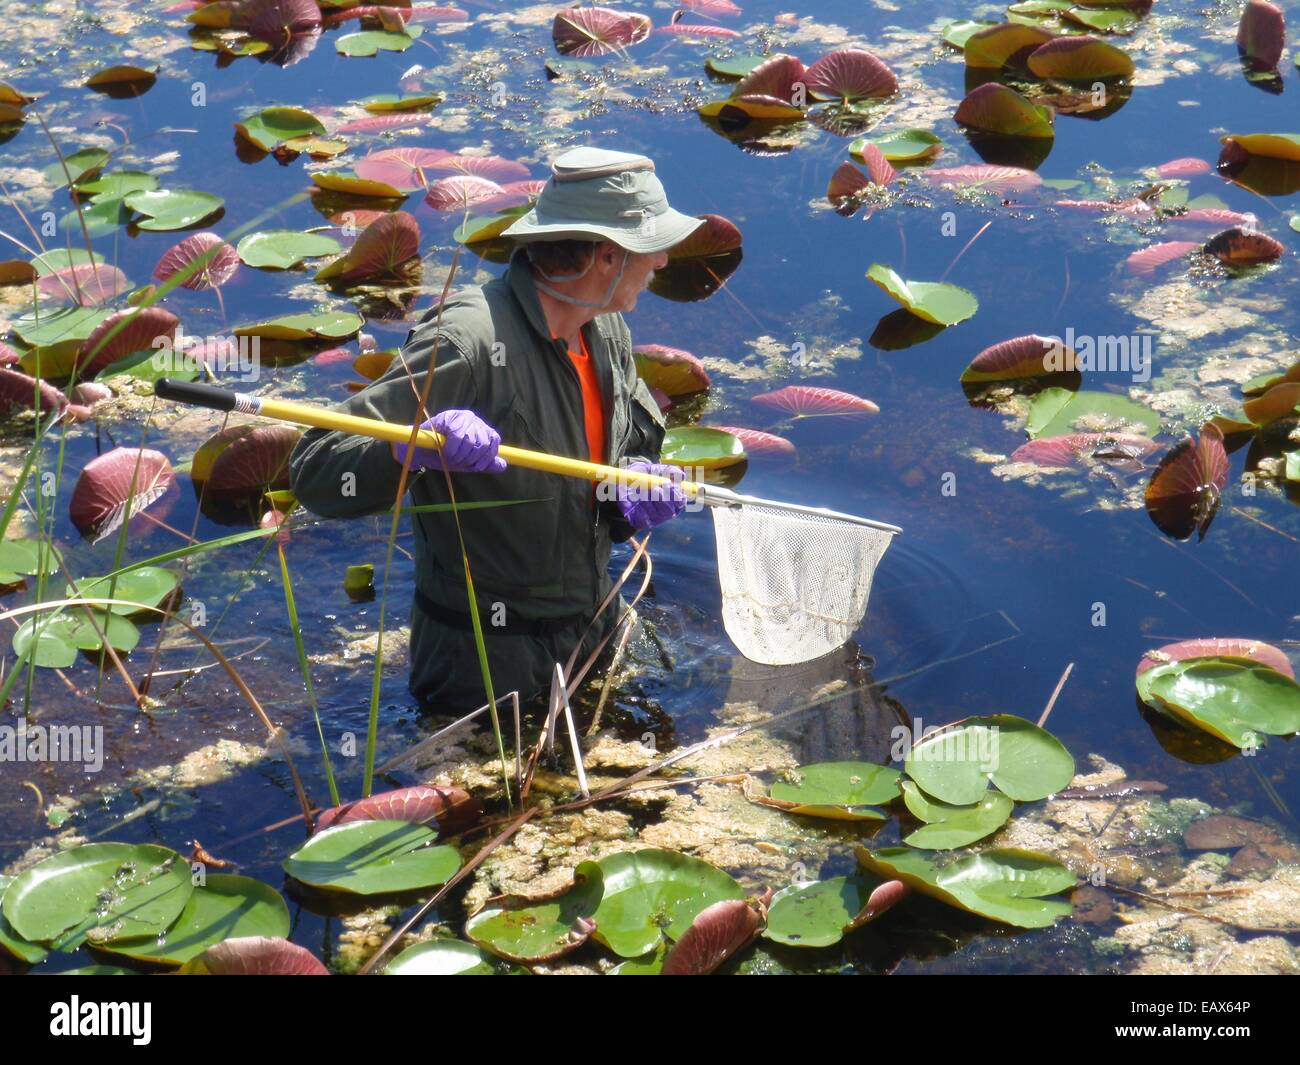 An EPA scientist collects a fish sample to be analyzed for mercury in the Everglades National Park during the Environmental Protection Agency Everglades Ecosystem Assessment September 10, 2014 in Florida. The Everglades Ecosystem Assessment Program is a long-term research, monitoring and assessment effort to provide scientific information needed for management decisions on the Everglades restoration. Stock Photo